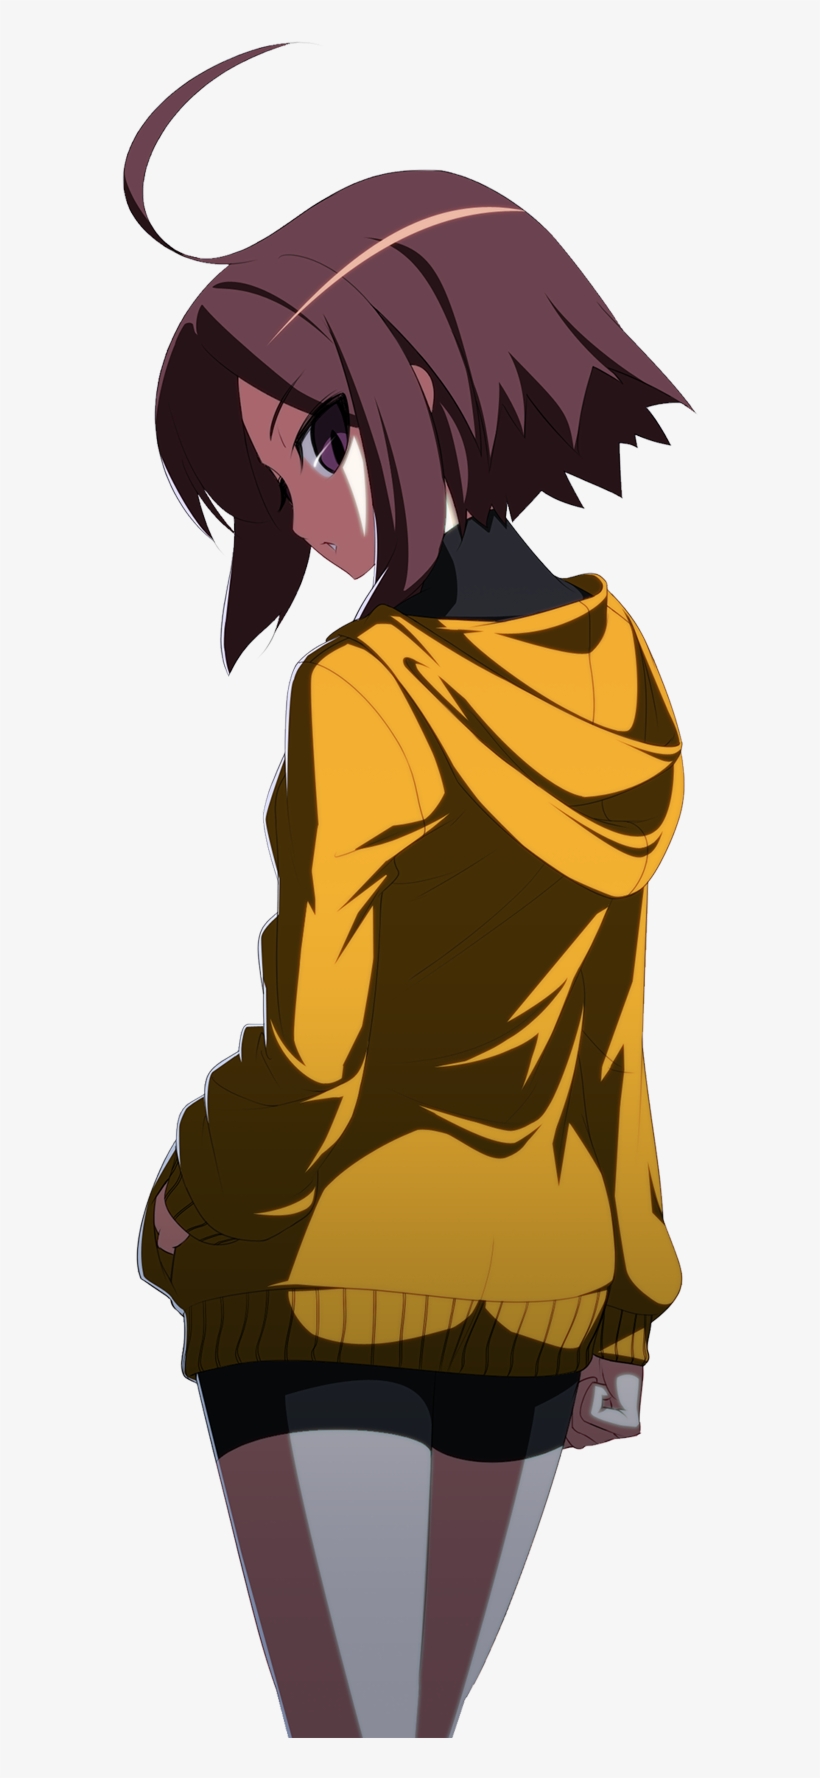 Victory-lin - Under Night In Birth Exe Late St Linne, transparent png #5742893